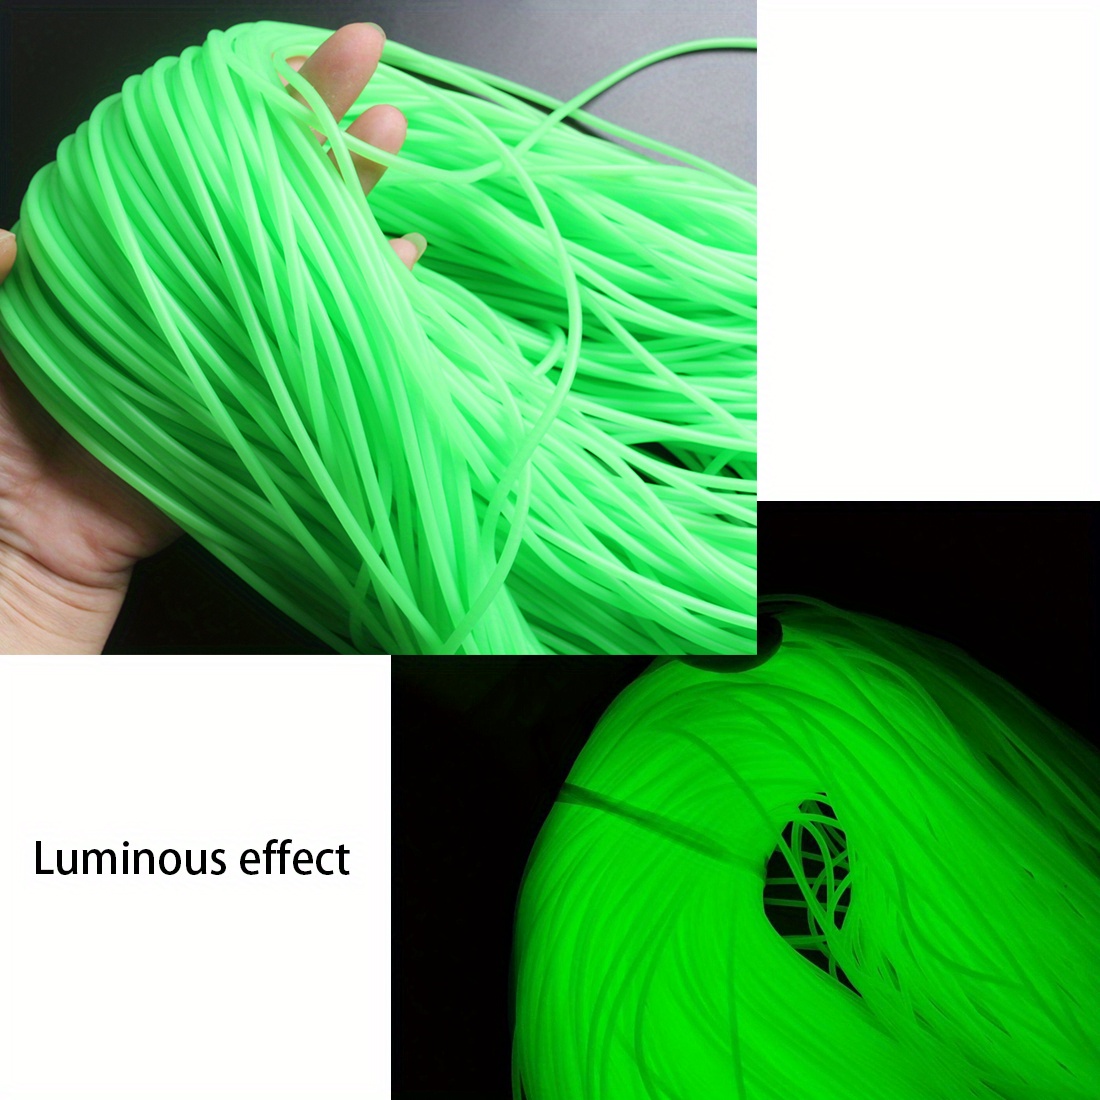 Glow in the Dark Tubing for Luring Fish and Protecting your Fishing Line